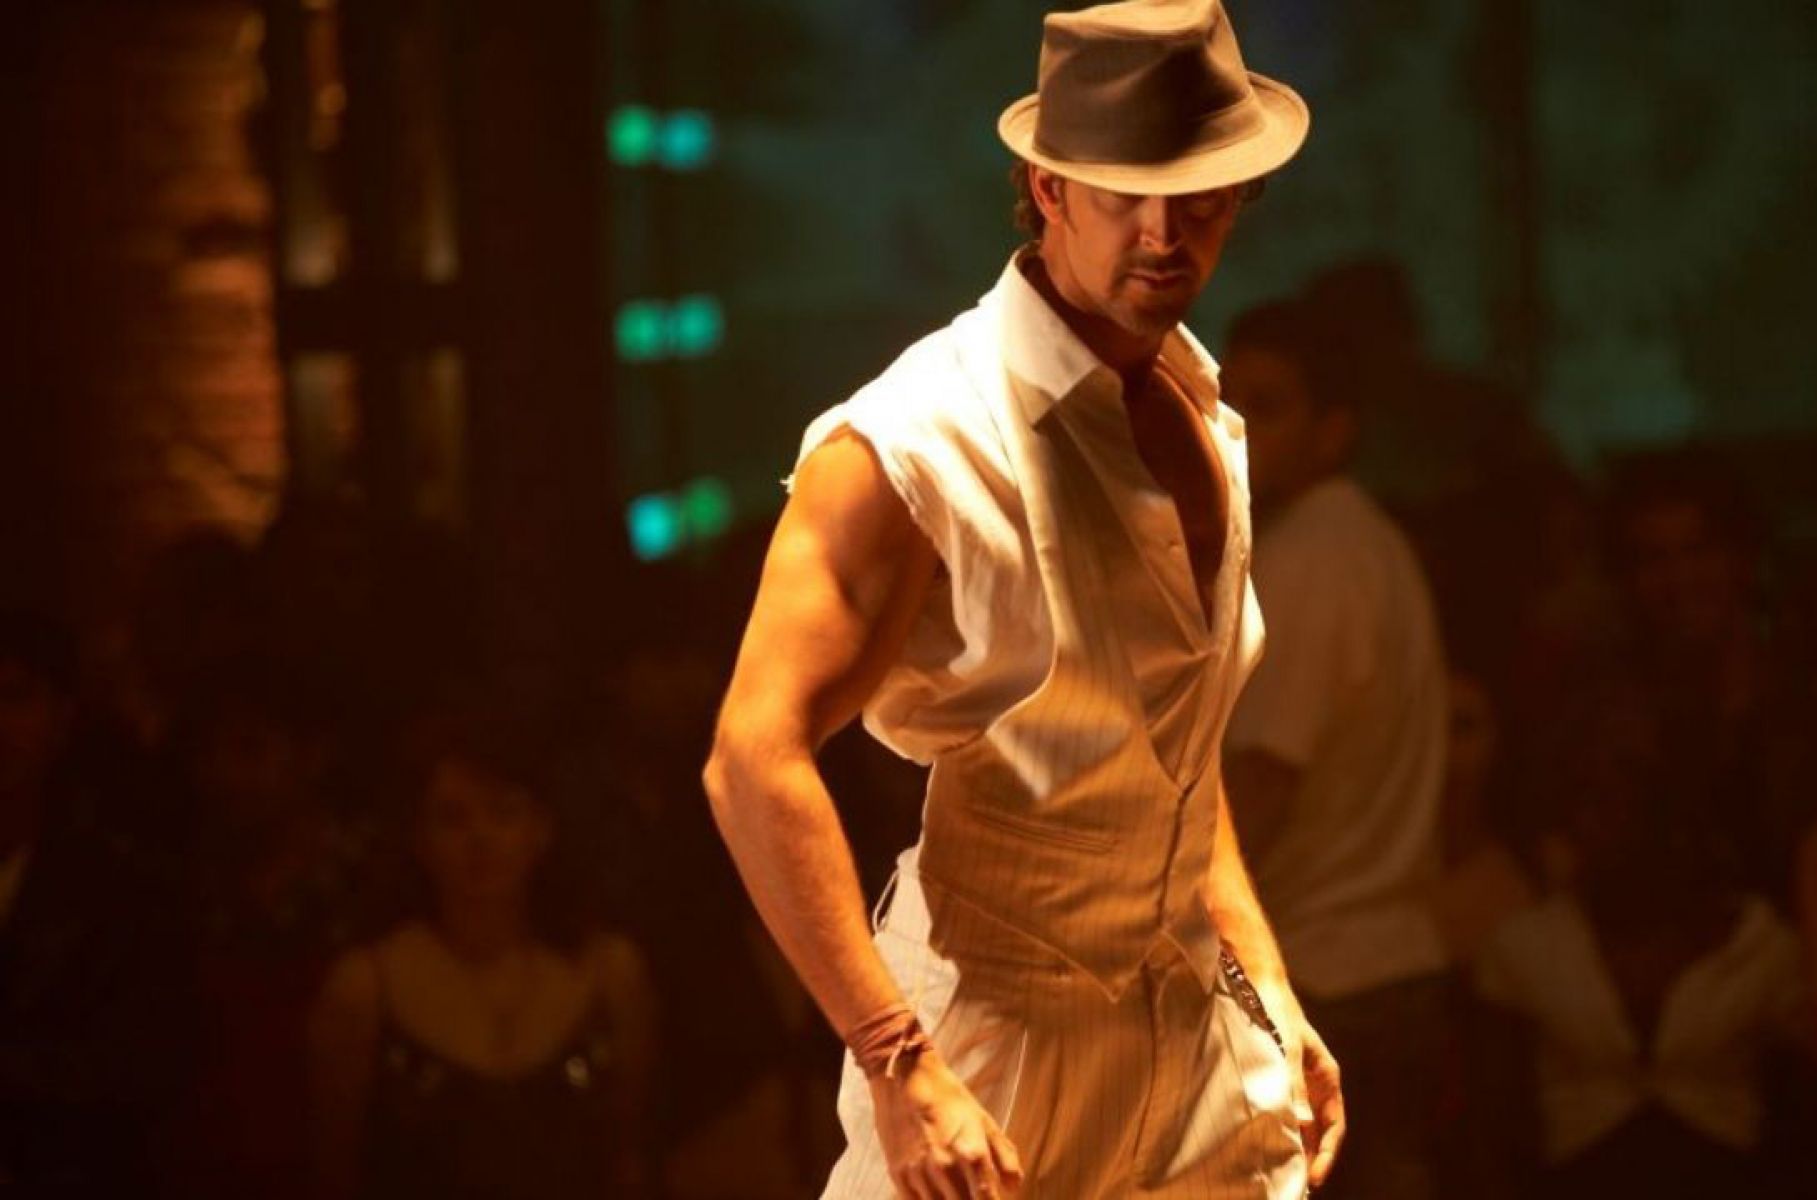 Hrithik Roshan Dancing Picture HD Dance And Music Wallpaper For